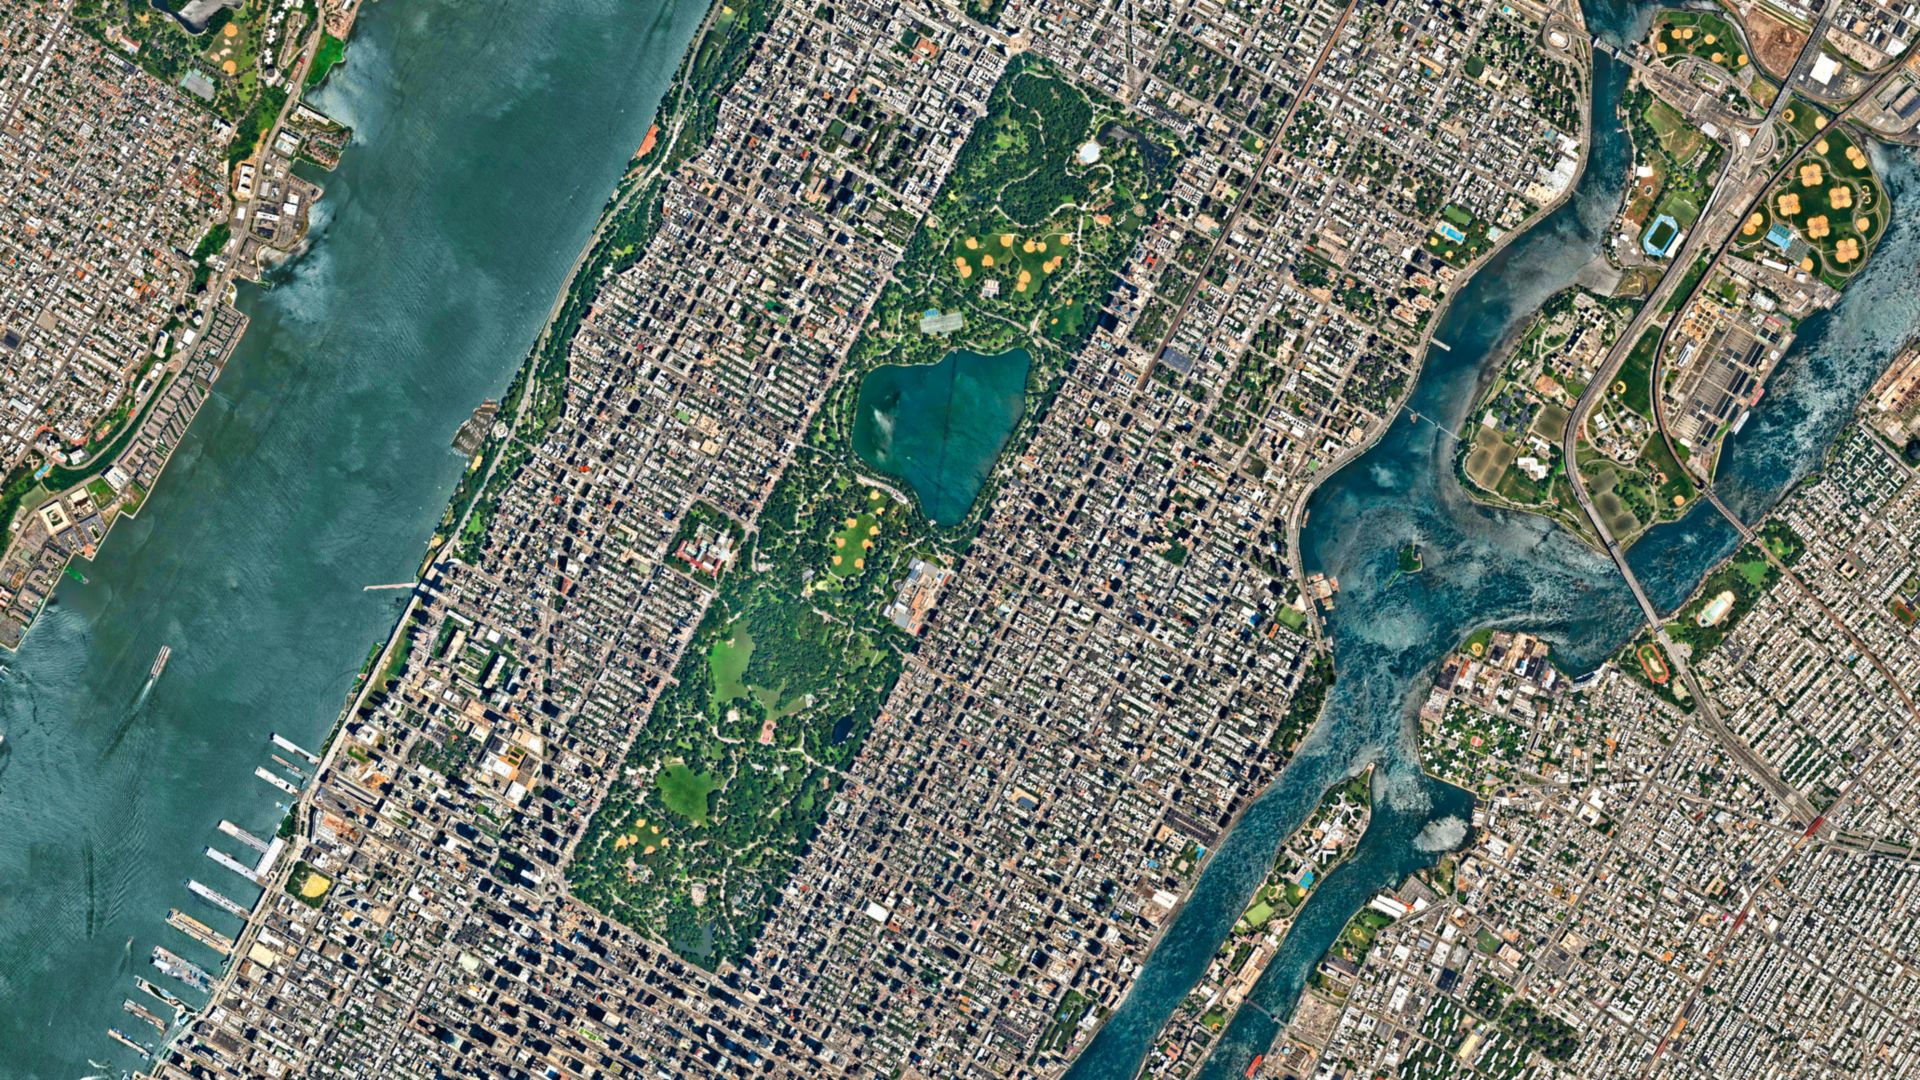 Growing densification of the cities is best visible from the air